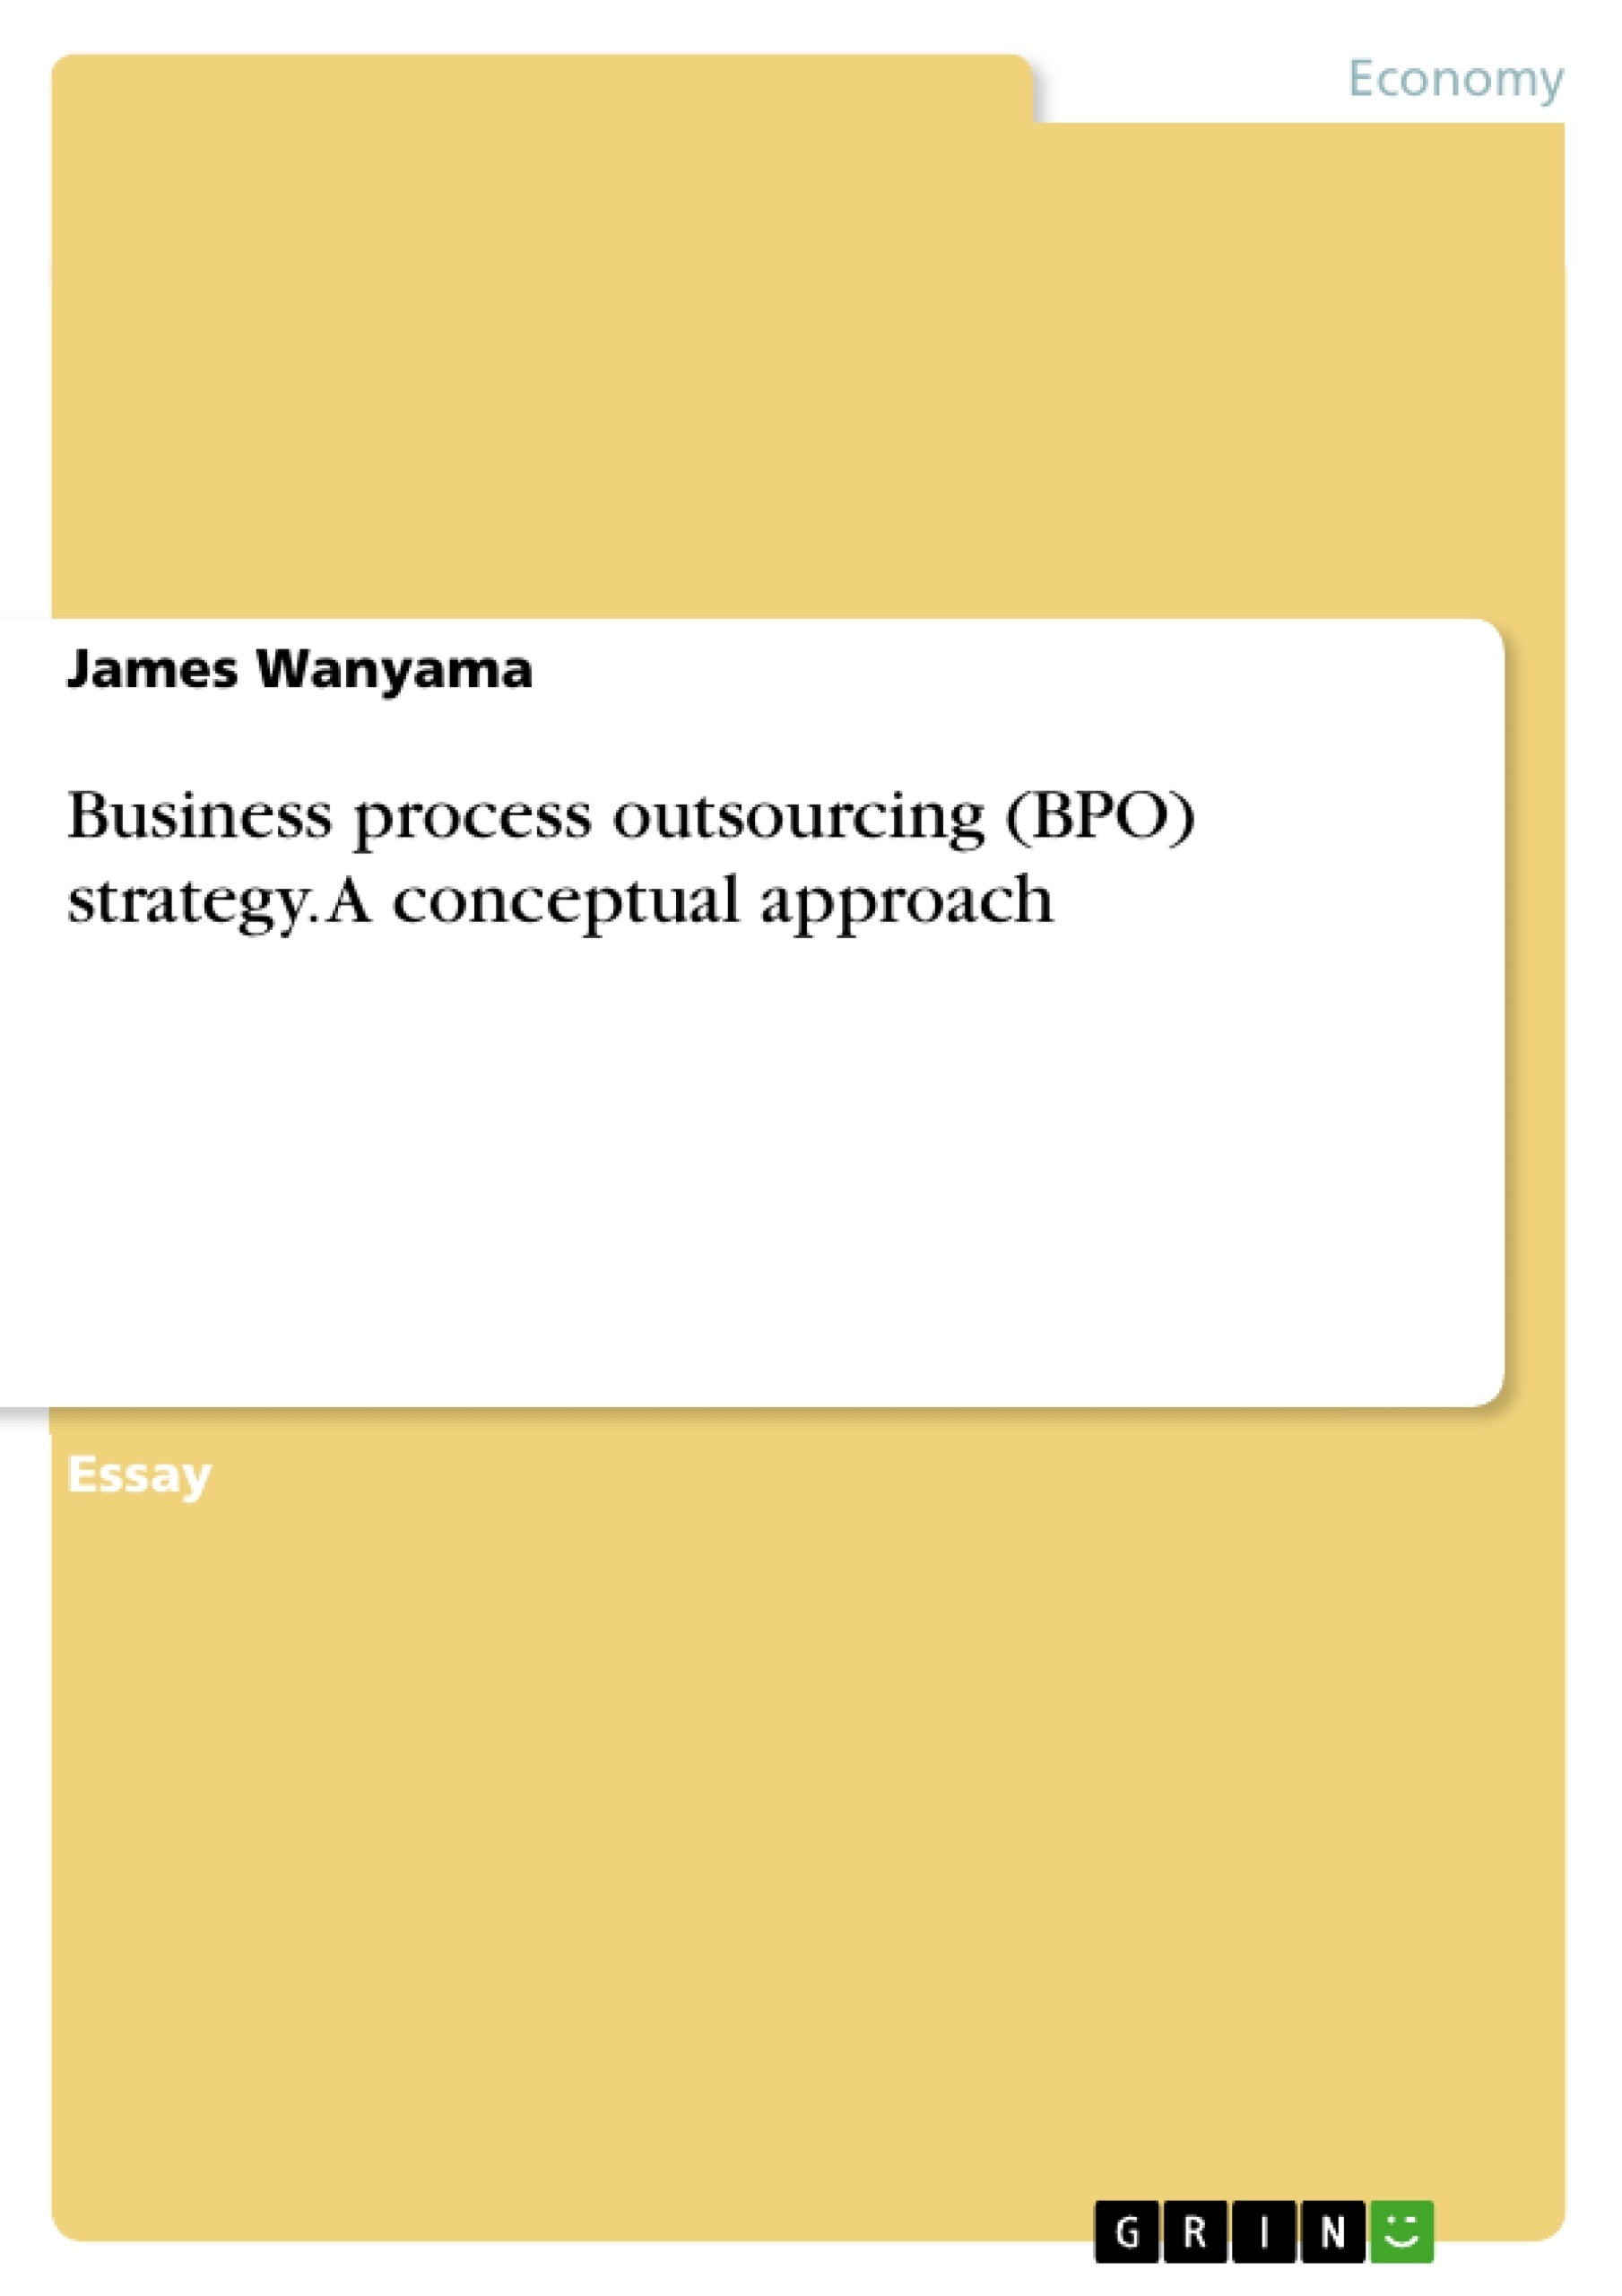 Title: Business process outsourcing (BPO) strategy. A conceptual approach